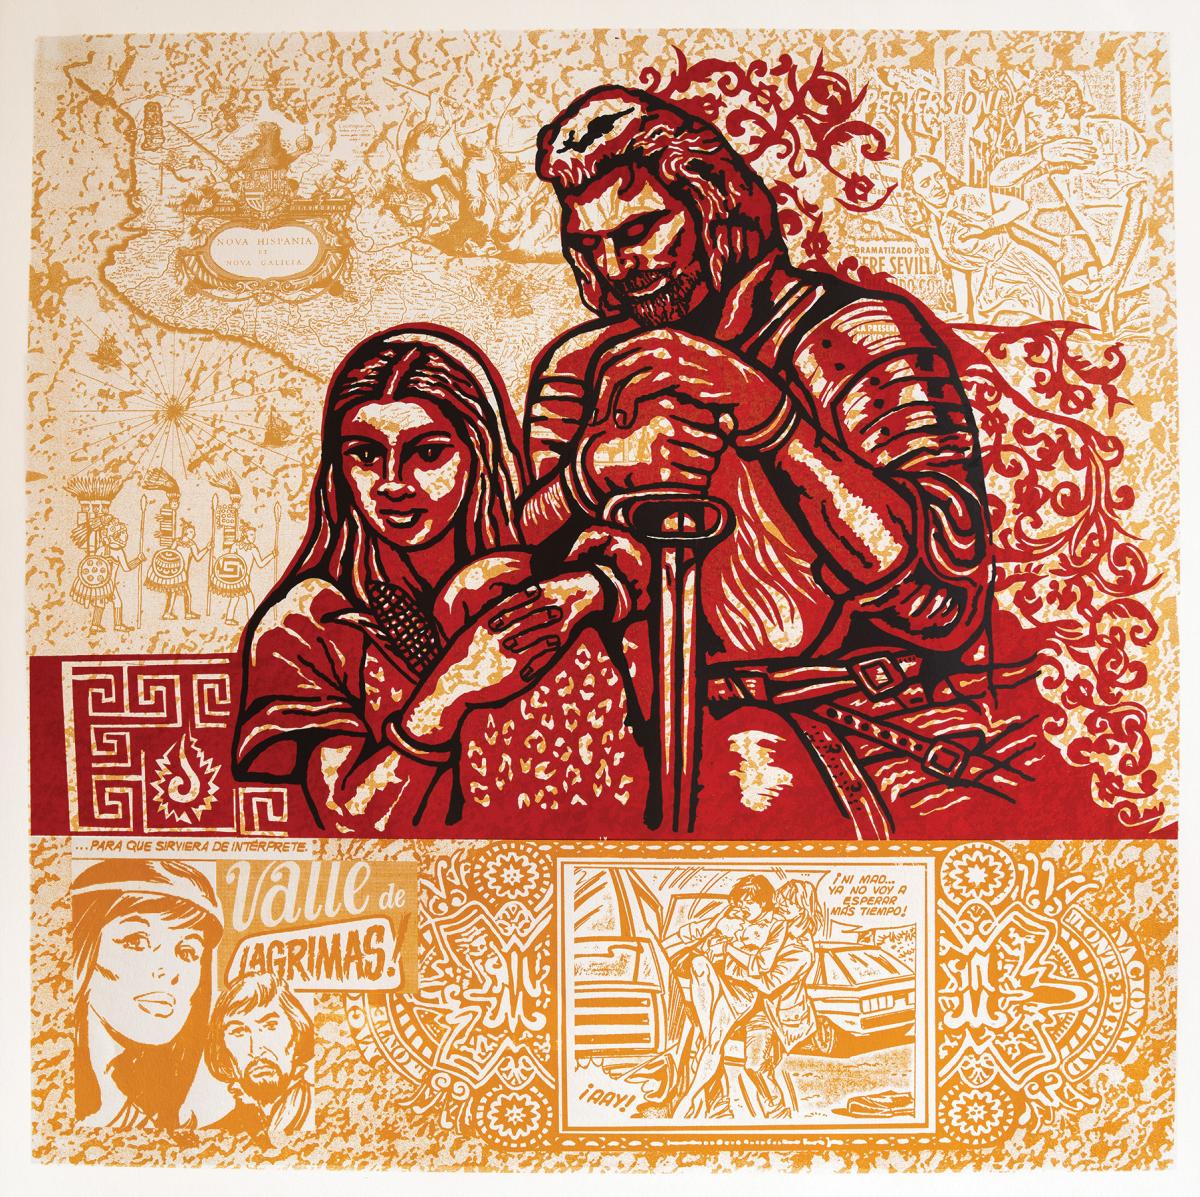 Malinche and Cortes pictured in an illustrative style